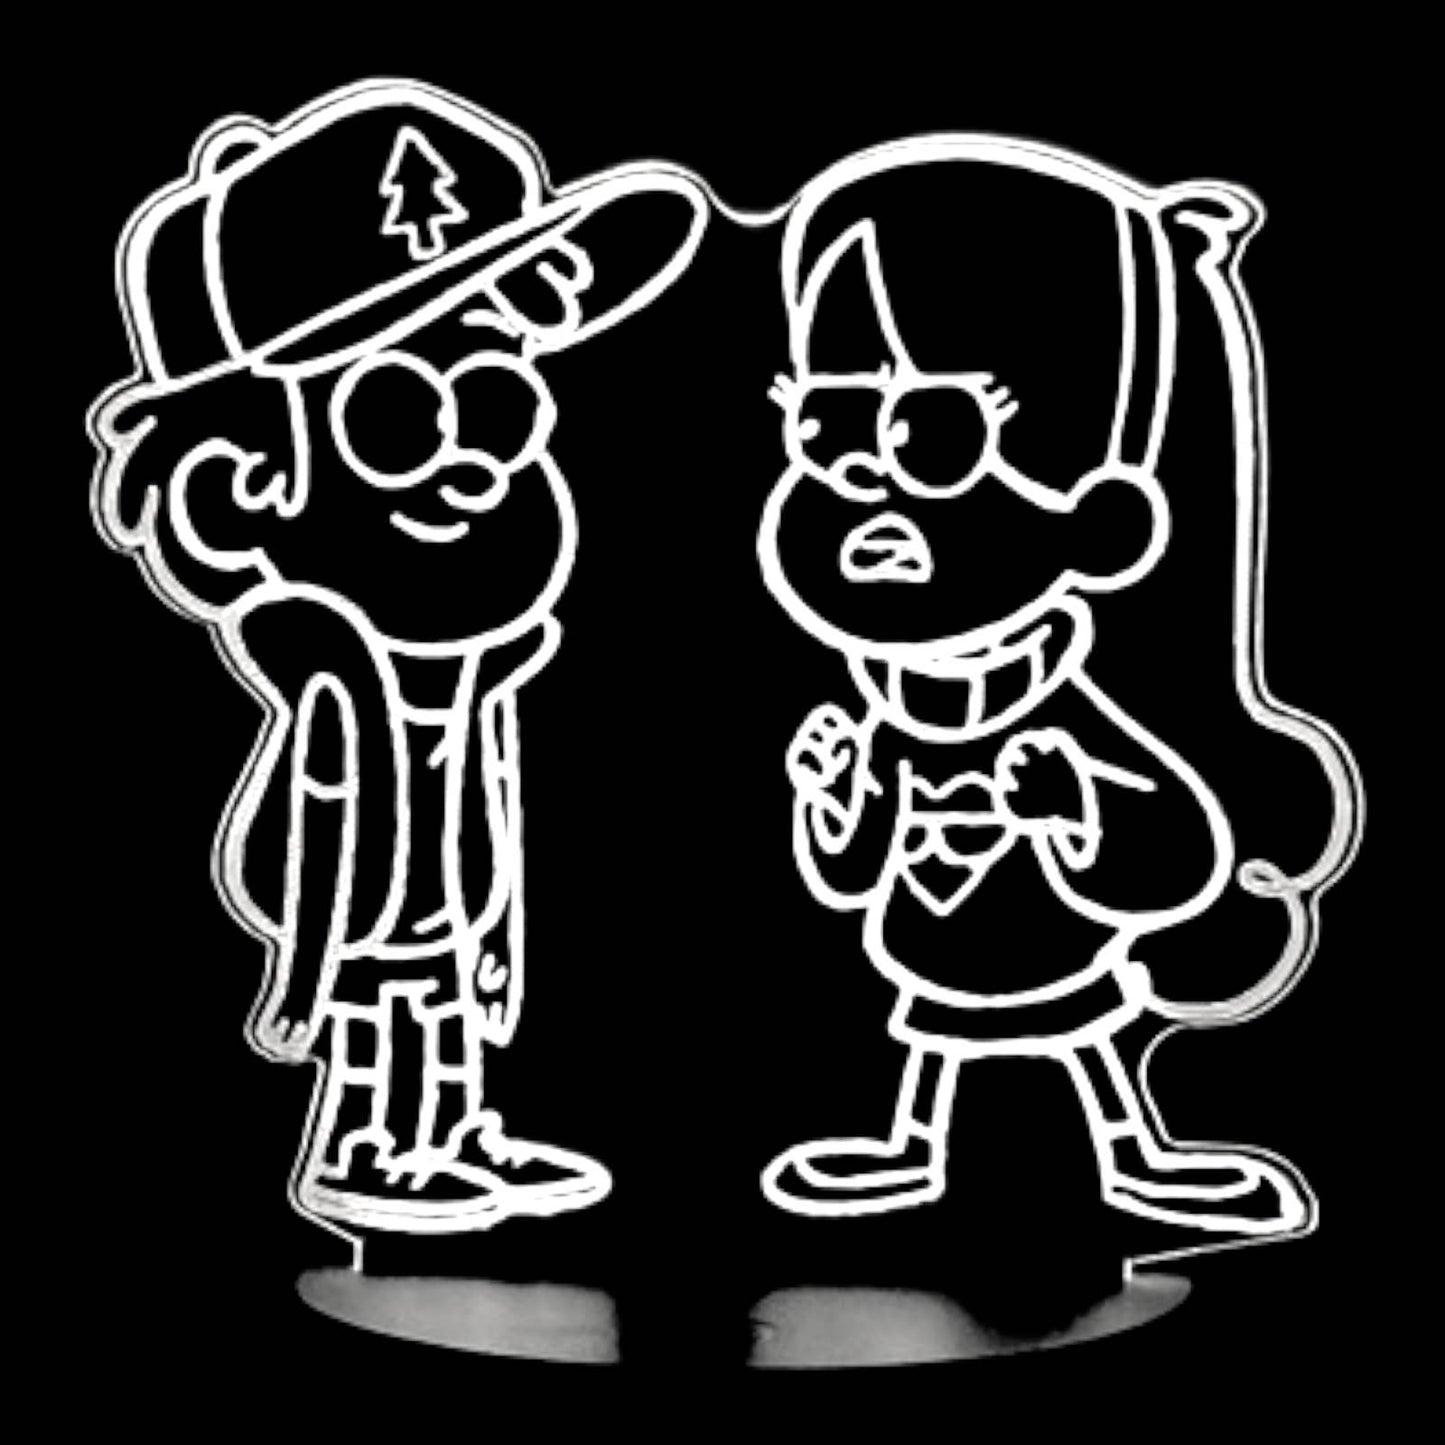 Gravity Falls 3D LED Night-Light 7 Color Changing Lamp w/ Touch Switch